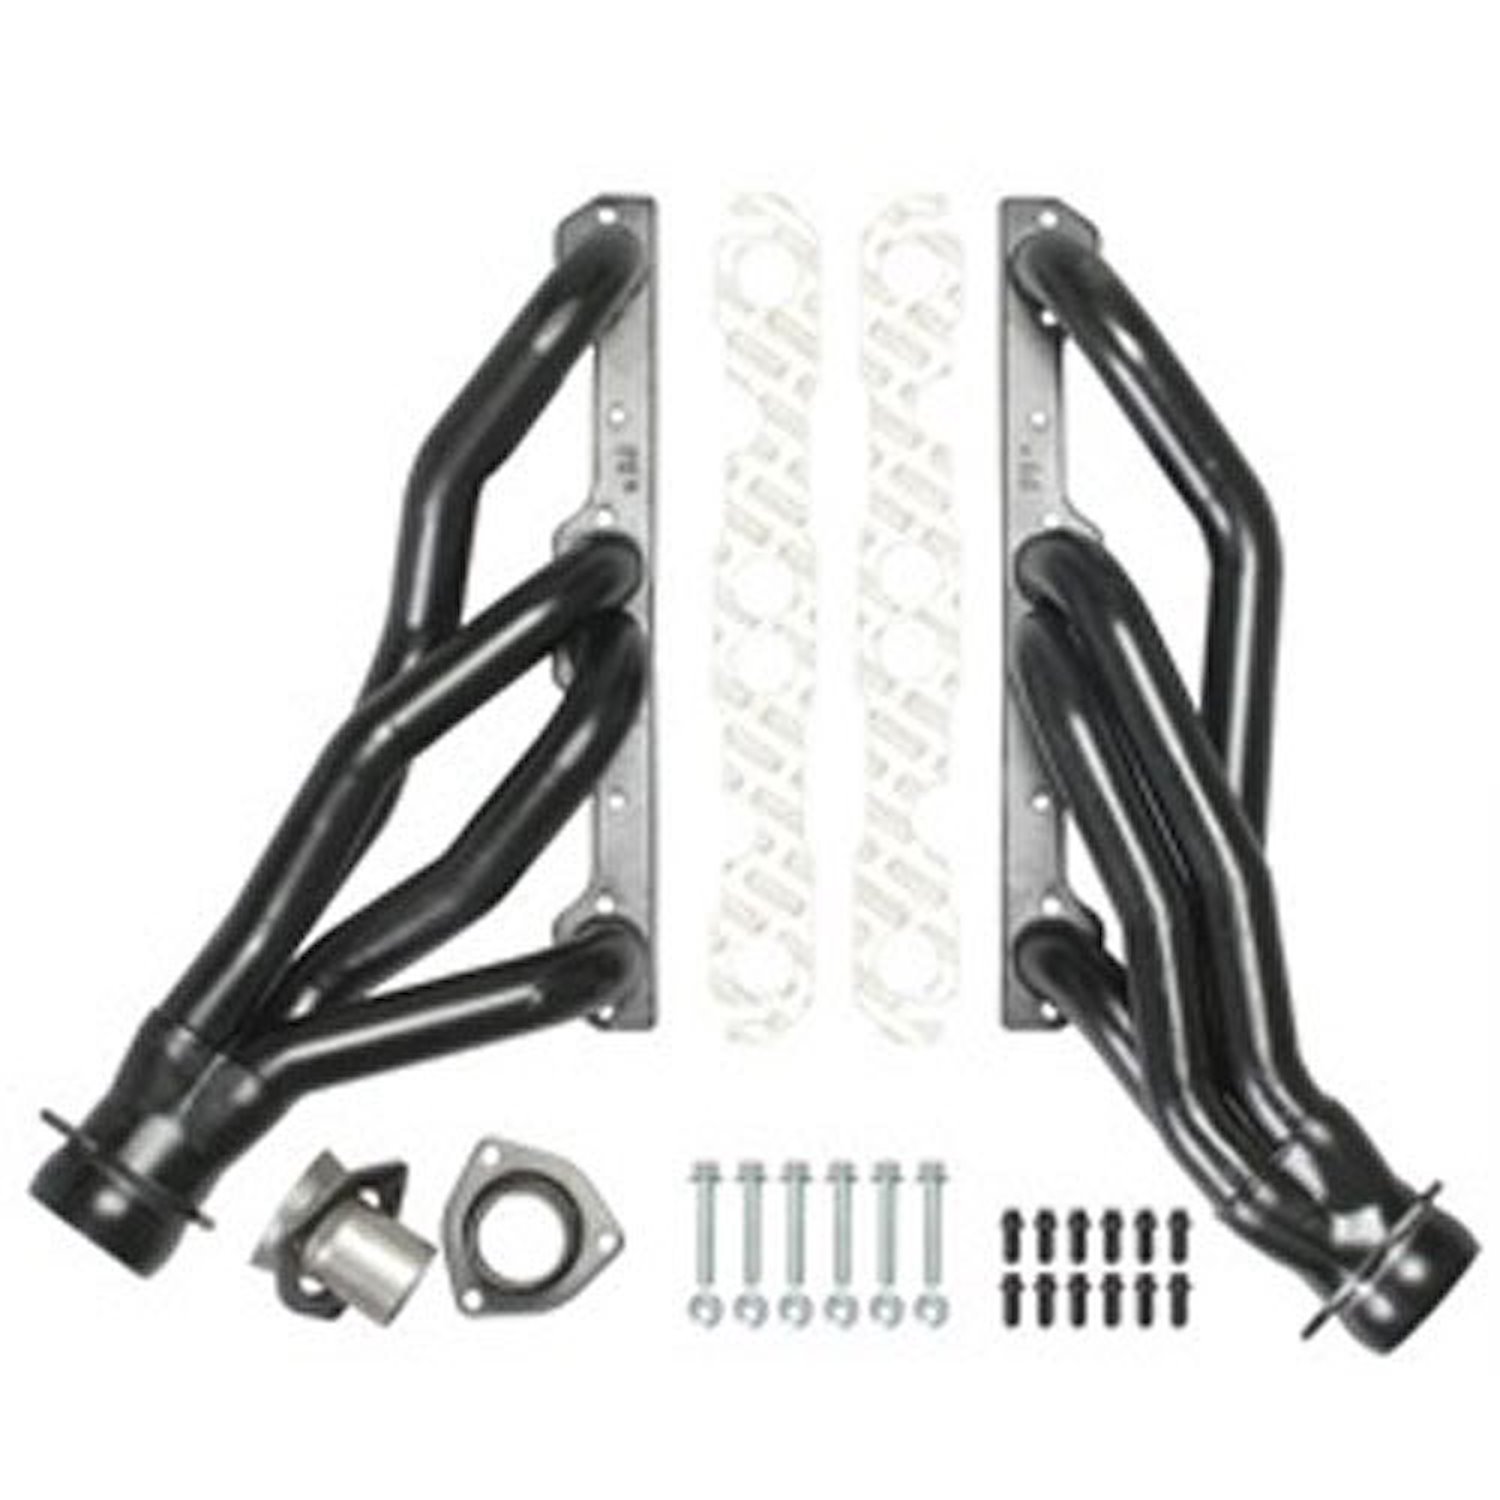 Standard Duty Uncoated Shorty Headers for 1964-87 Camaro,